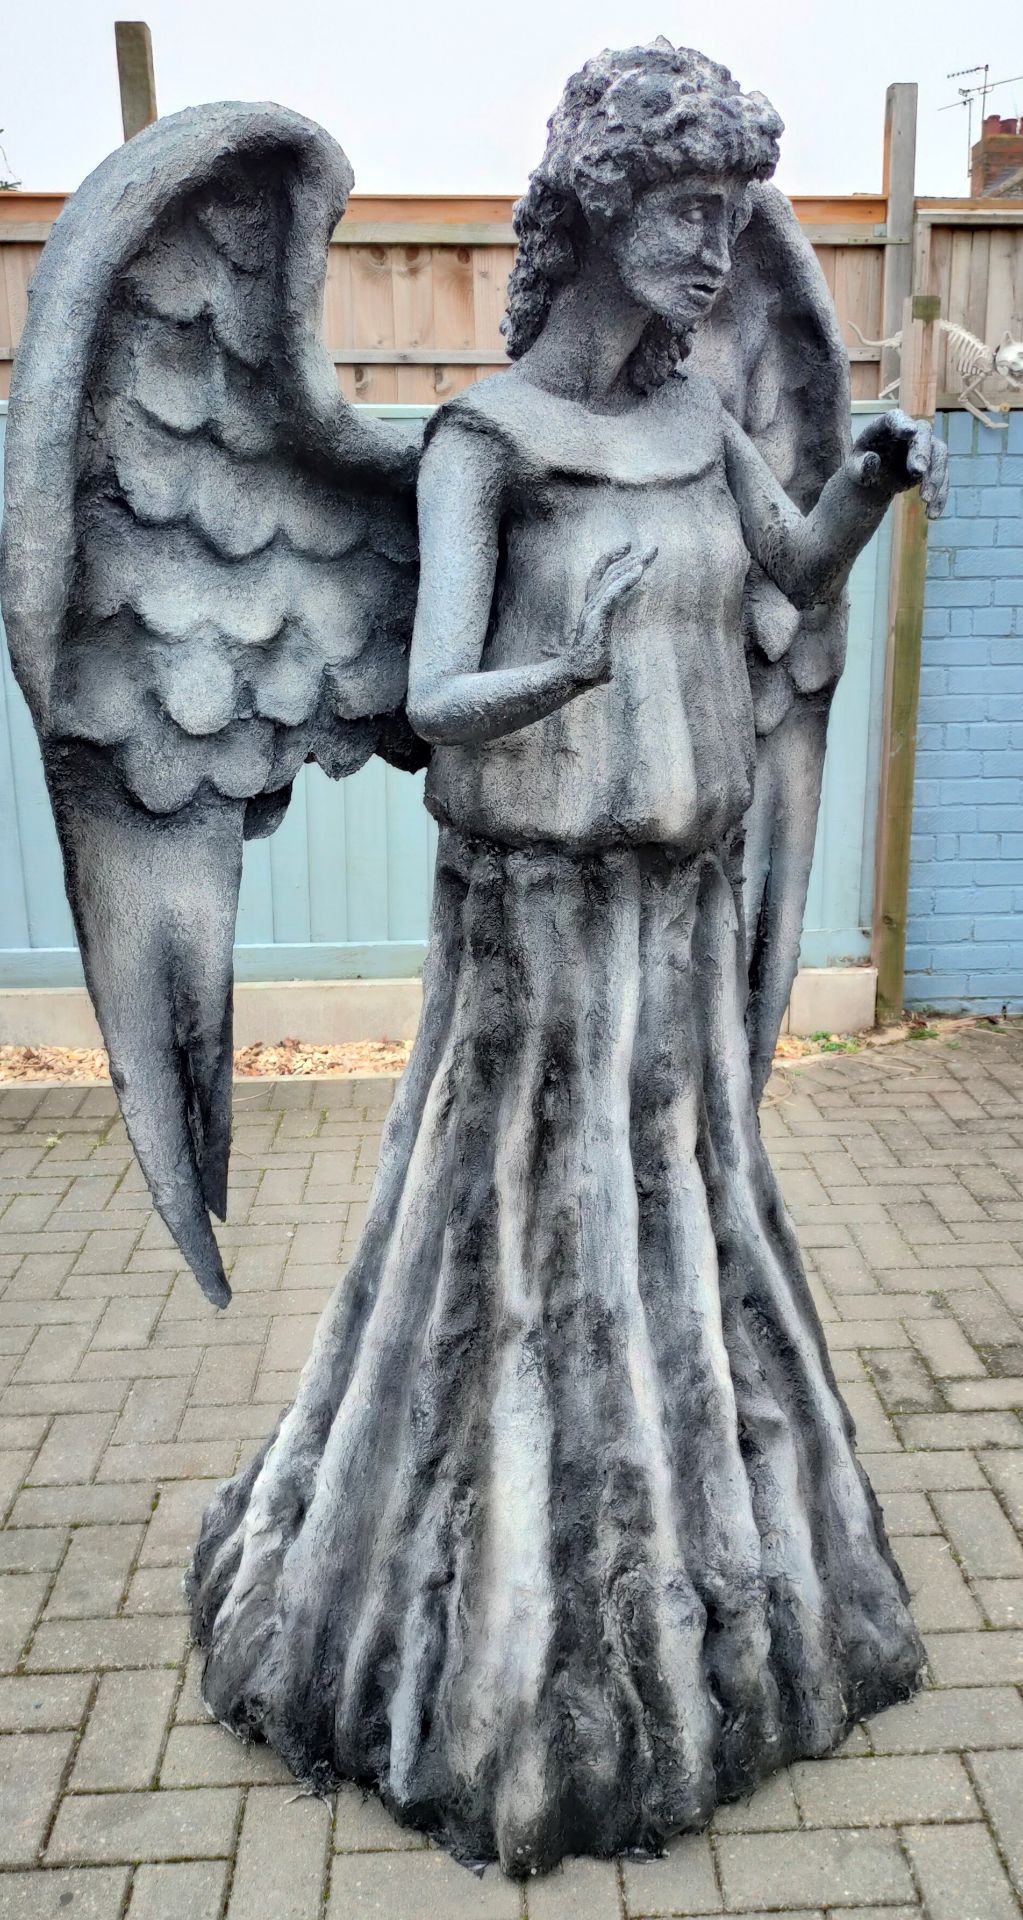 DOCTOR WHO - LIFESIZE PROP REPLICA WEEPING ANGEL STATUE - Image 15 of 15